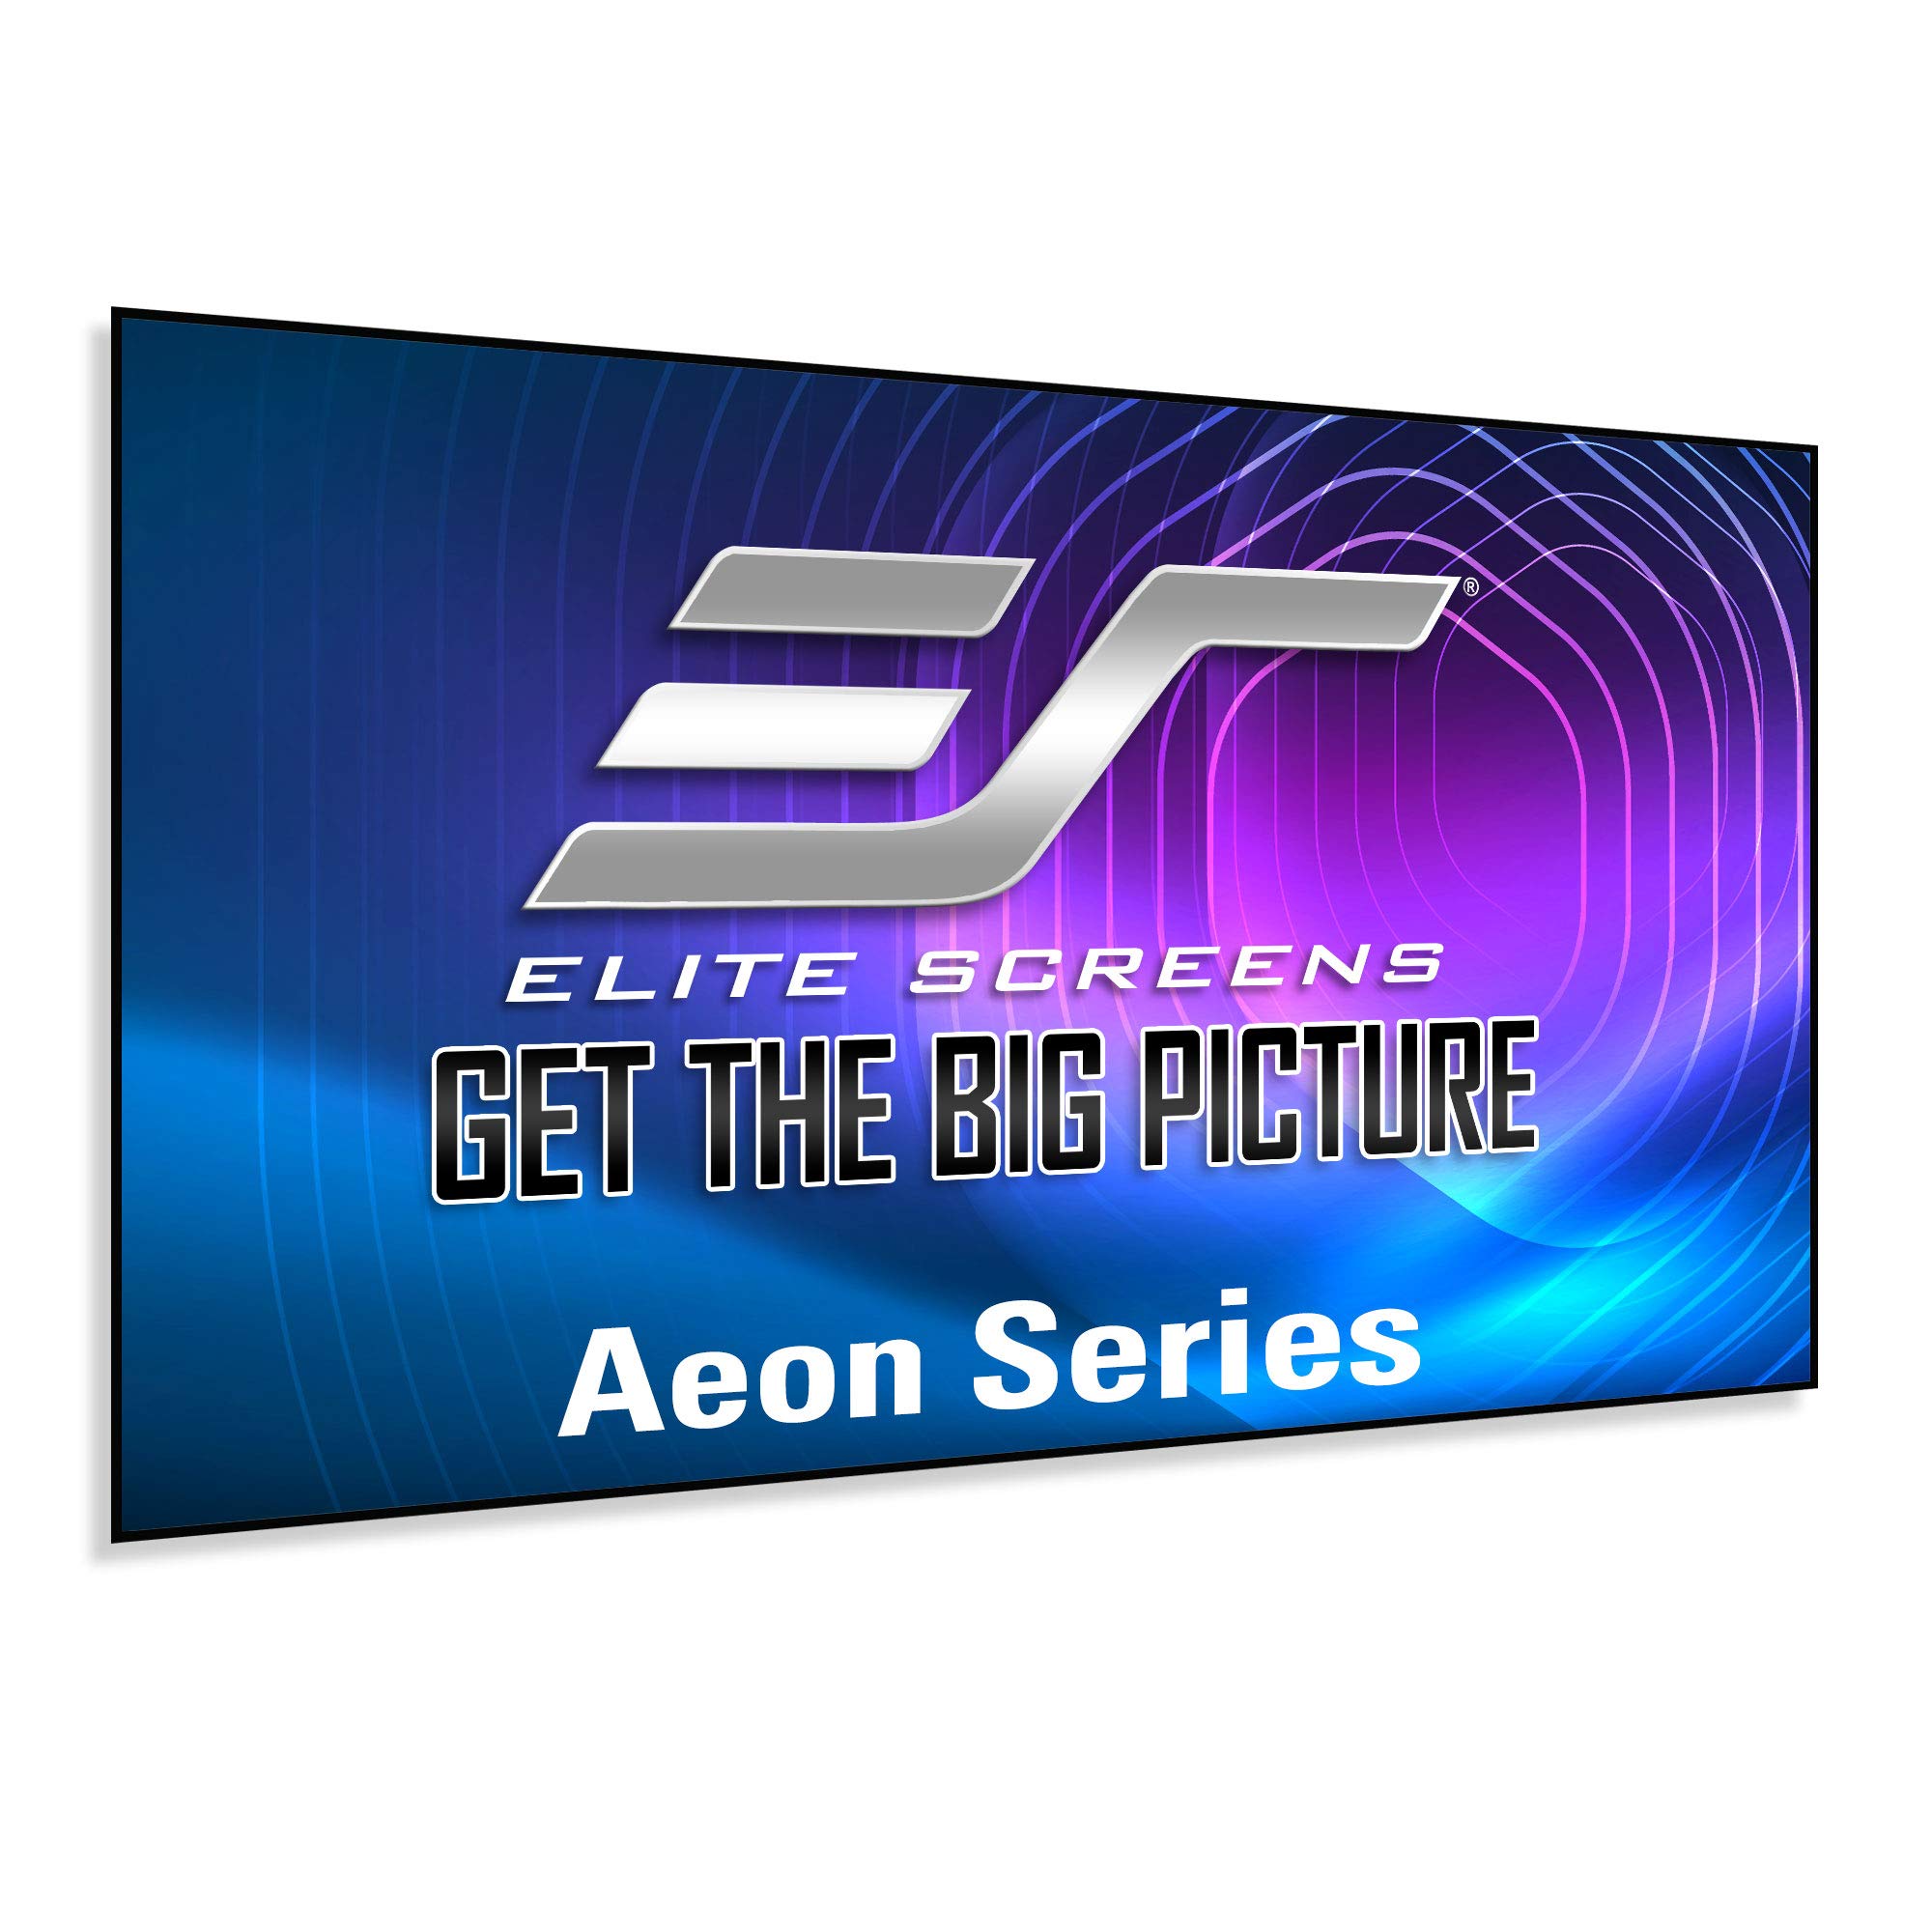 Elite Screens Aeon Series, 150-inch 16:9, 8K / 4K Ultra HD Home Theater Fixed Frame EDGE FREE Borderless Projector Screen, CineWhite UHD-B Front Projection Screen, AR150WH2, 150-inch / 16:9